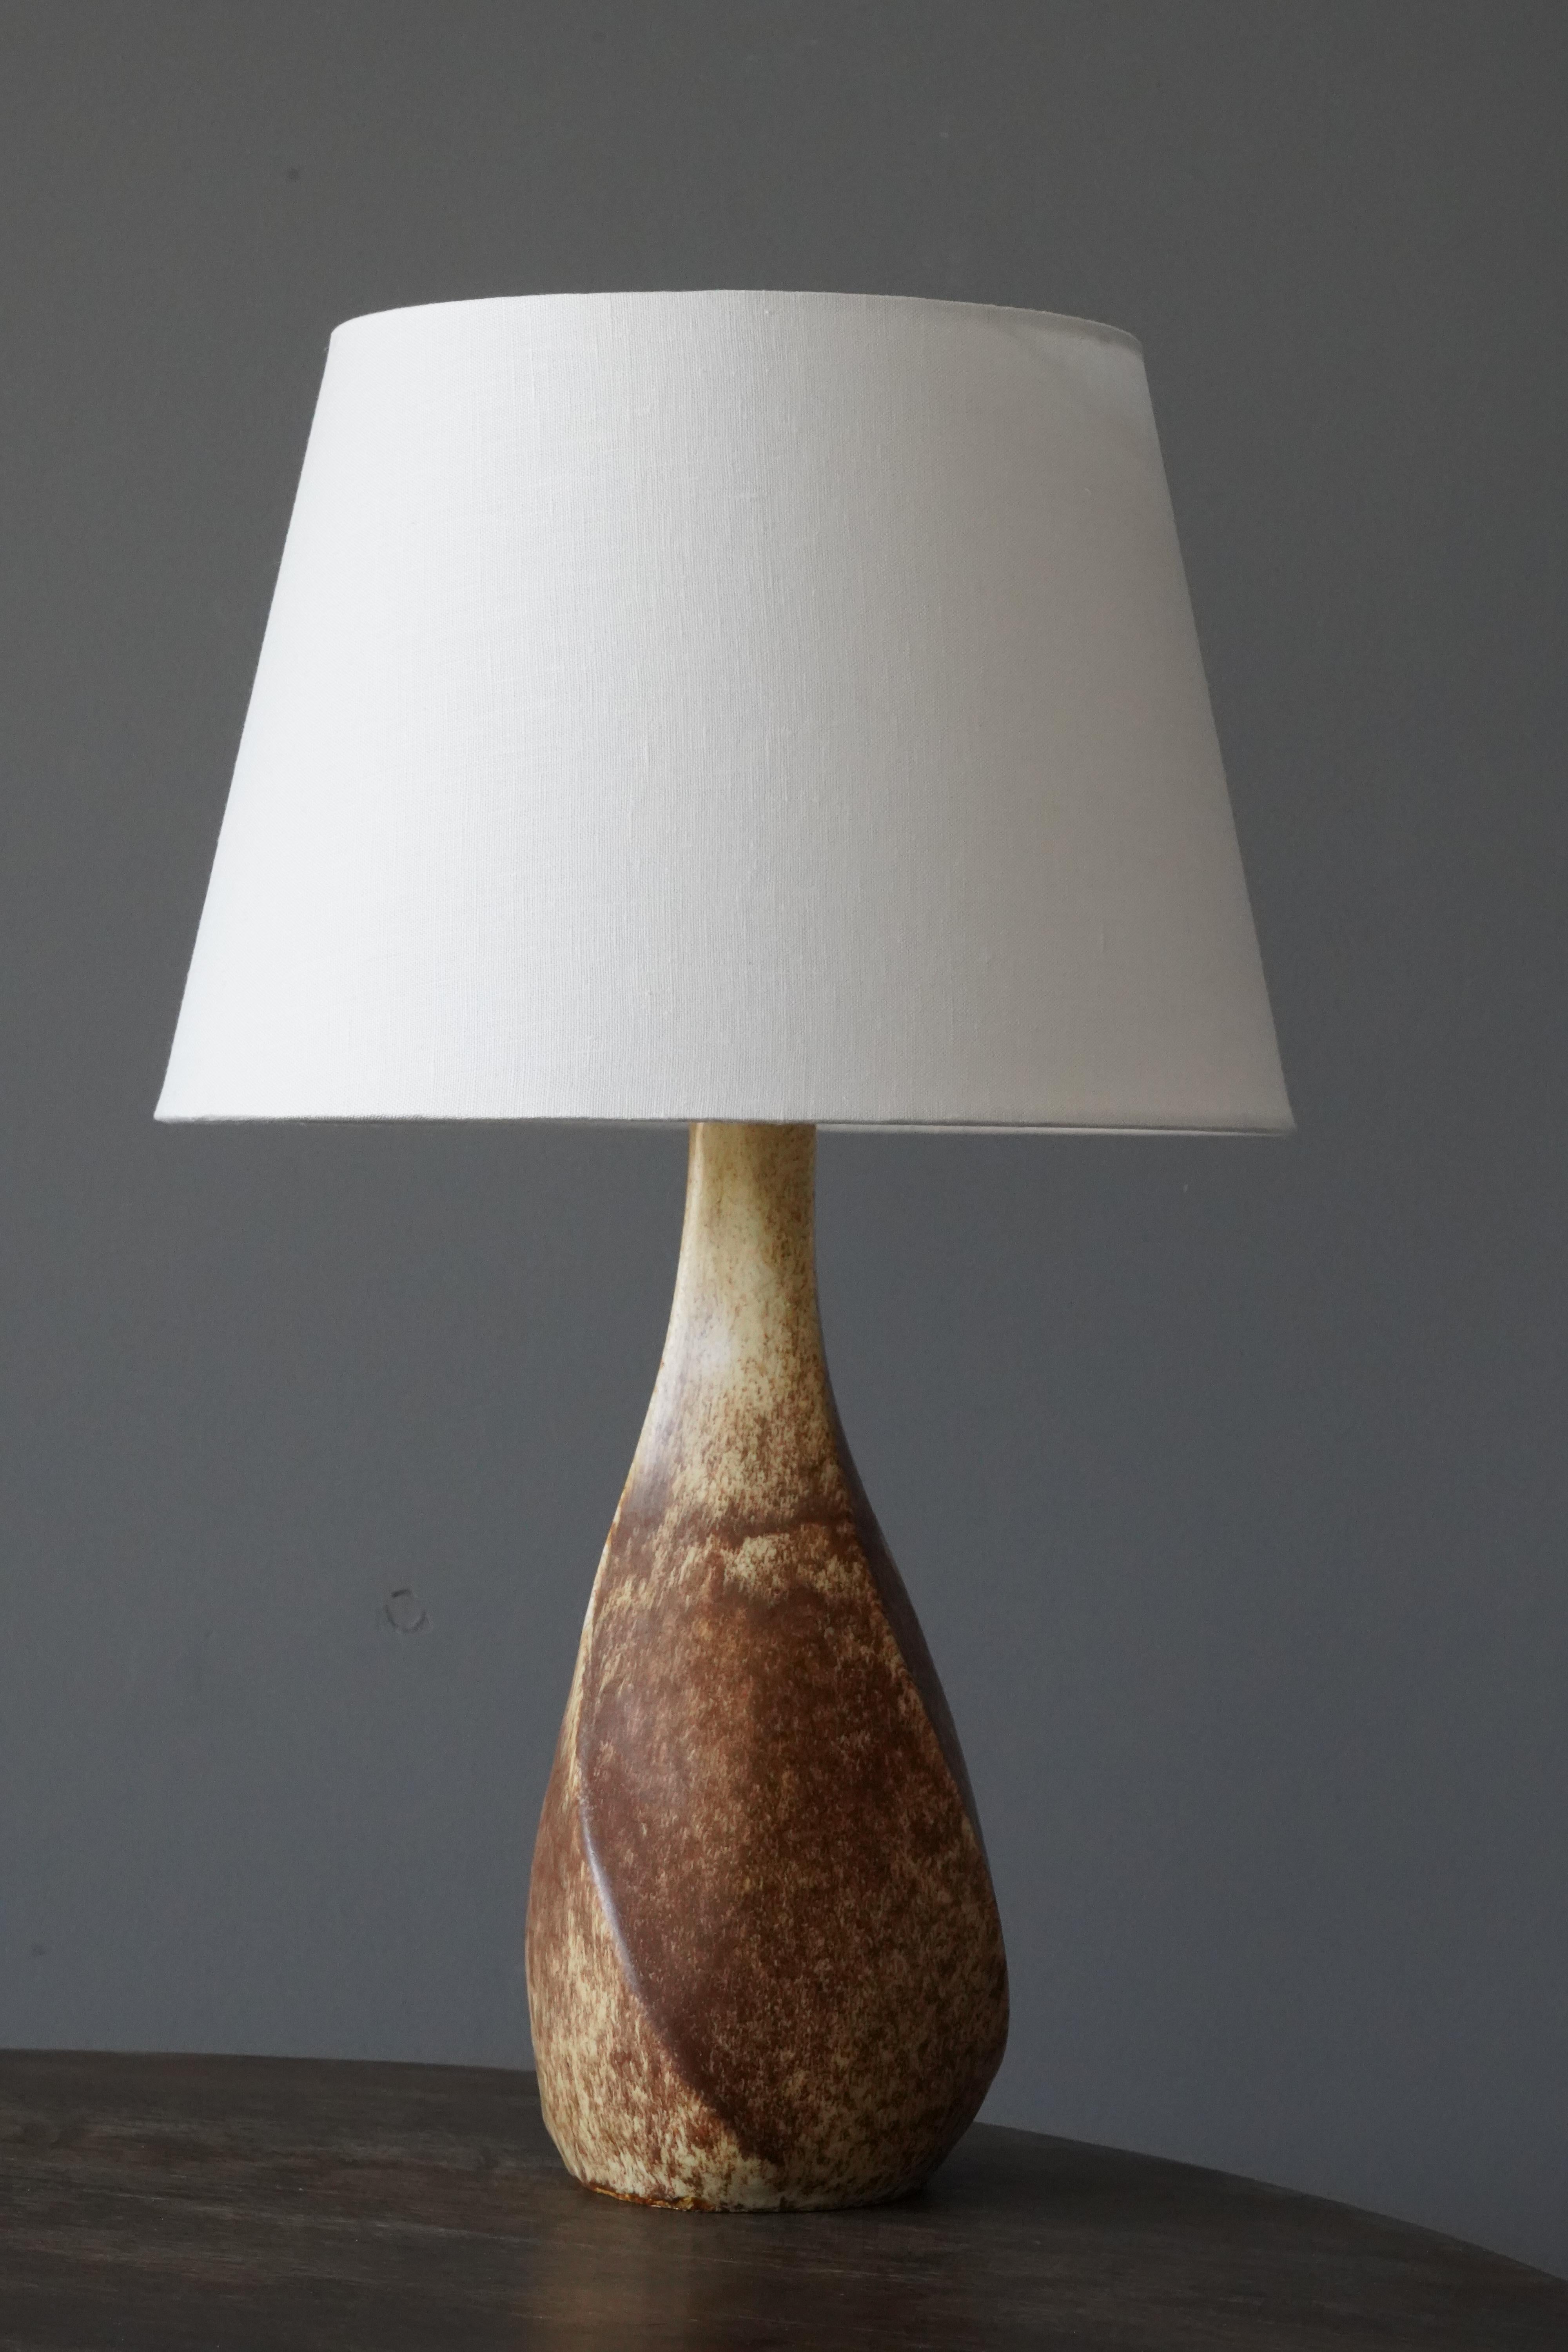 A sizable table lamp. In glazed stoneware. Signed to bottom.

Stated dimensions exclude lampshade. Height includes socket. Sold without lampshade.

Glaze features brown-beige colors.